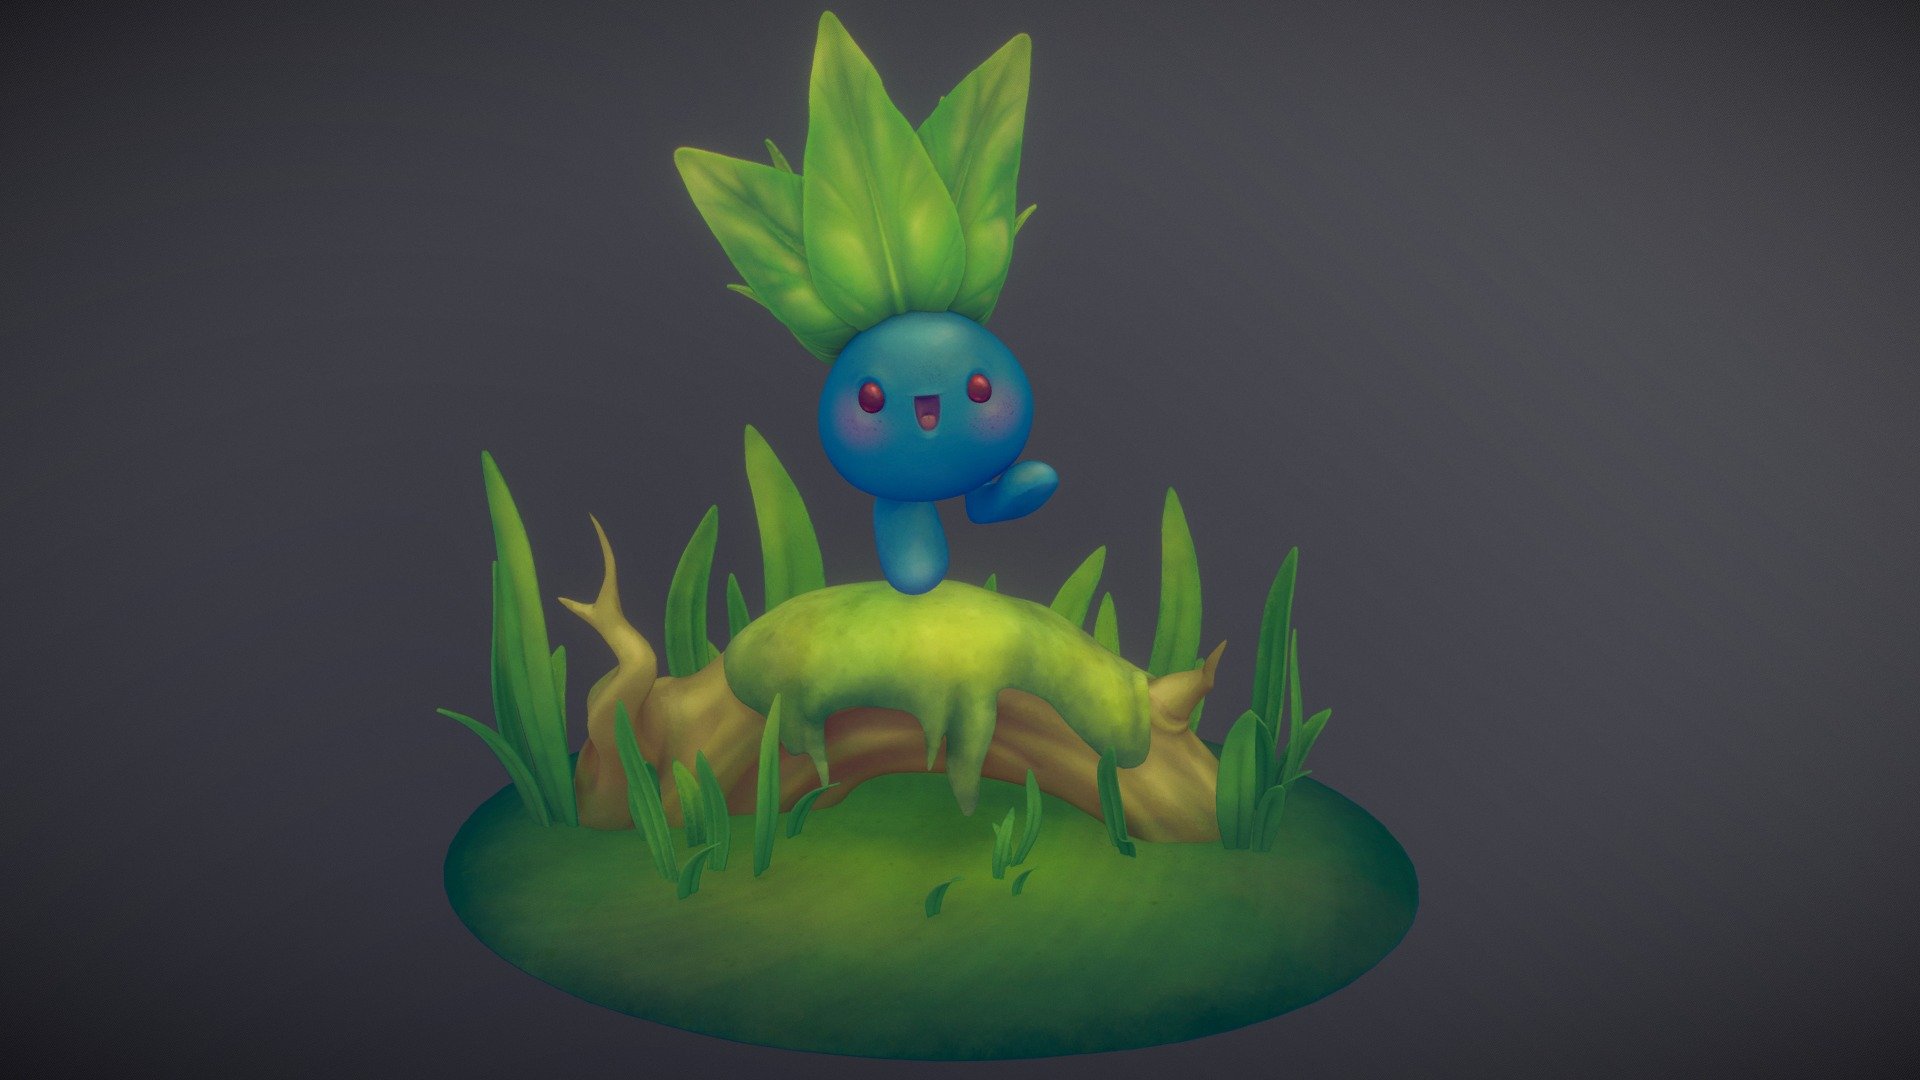 Here's a model i made for a challenge with friends! Love how it turned out and hope you enjoy this little dude as well!
(queue &ldquo;Here come the boiIiiIii!